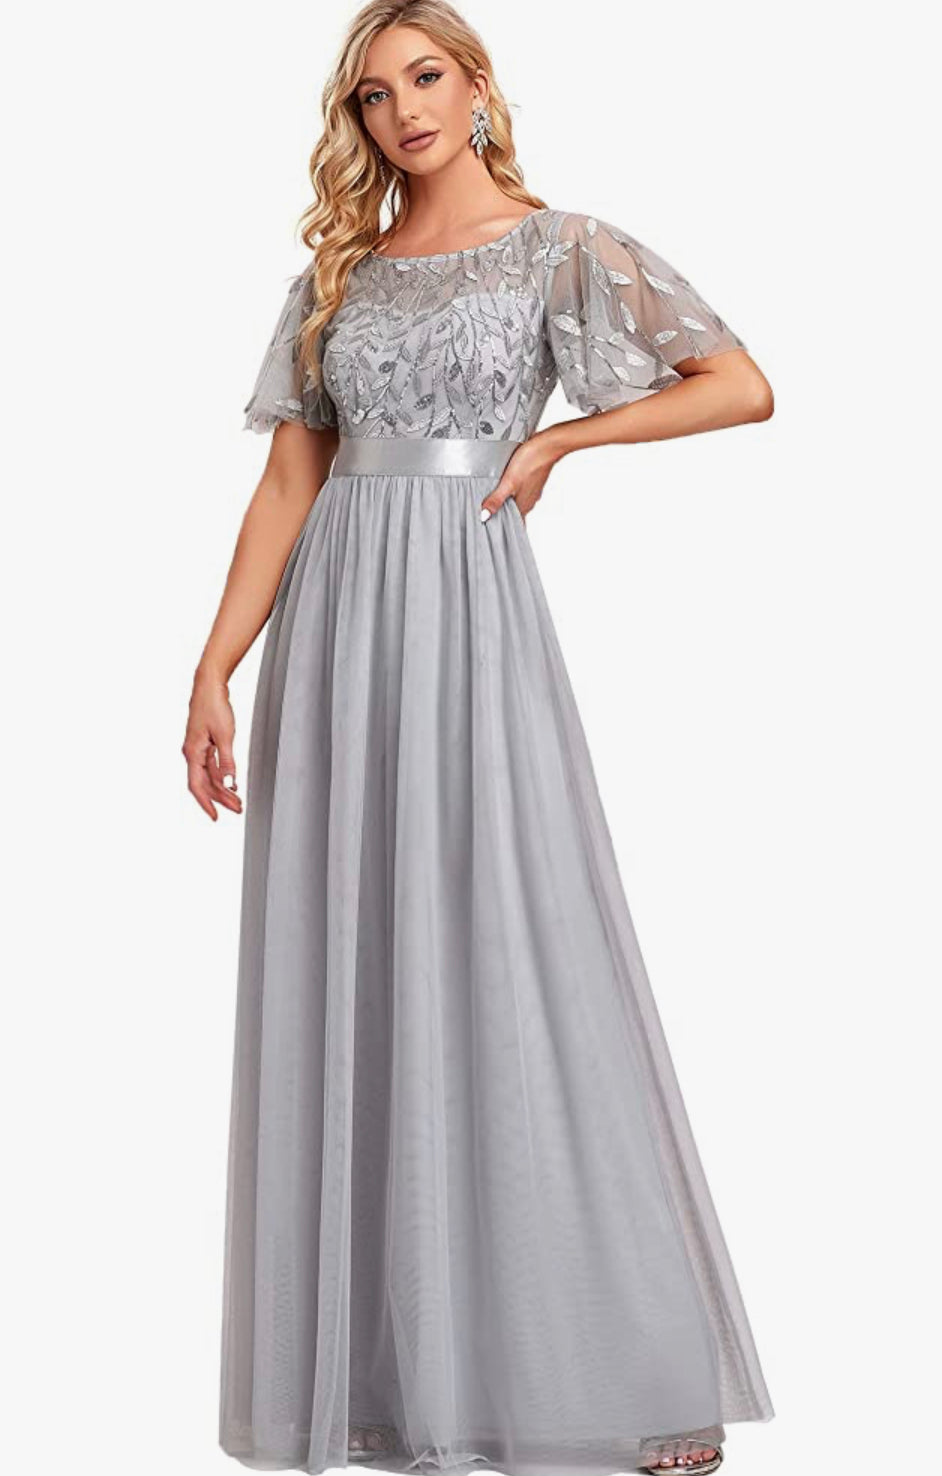 Empire Waist Embroidery Formal Dress (US Sizes 4 - 26) Gray